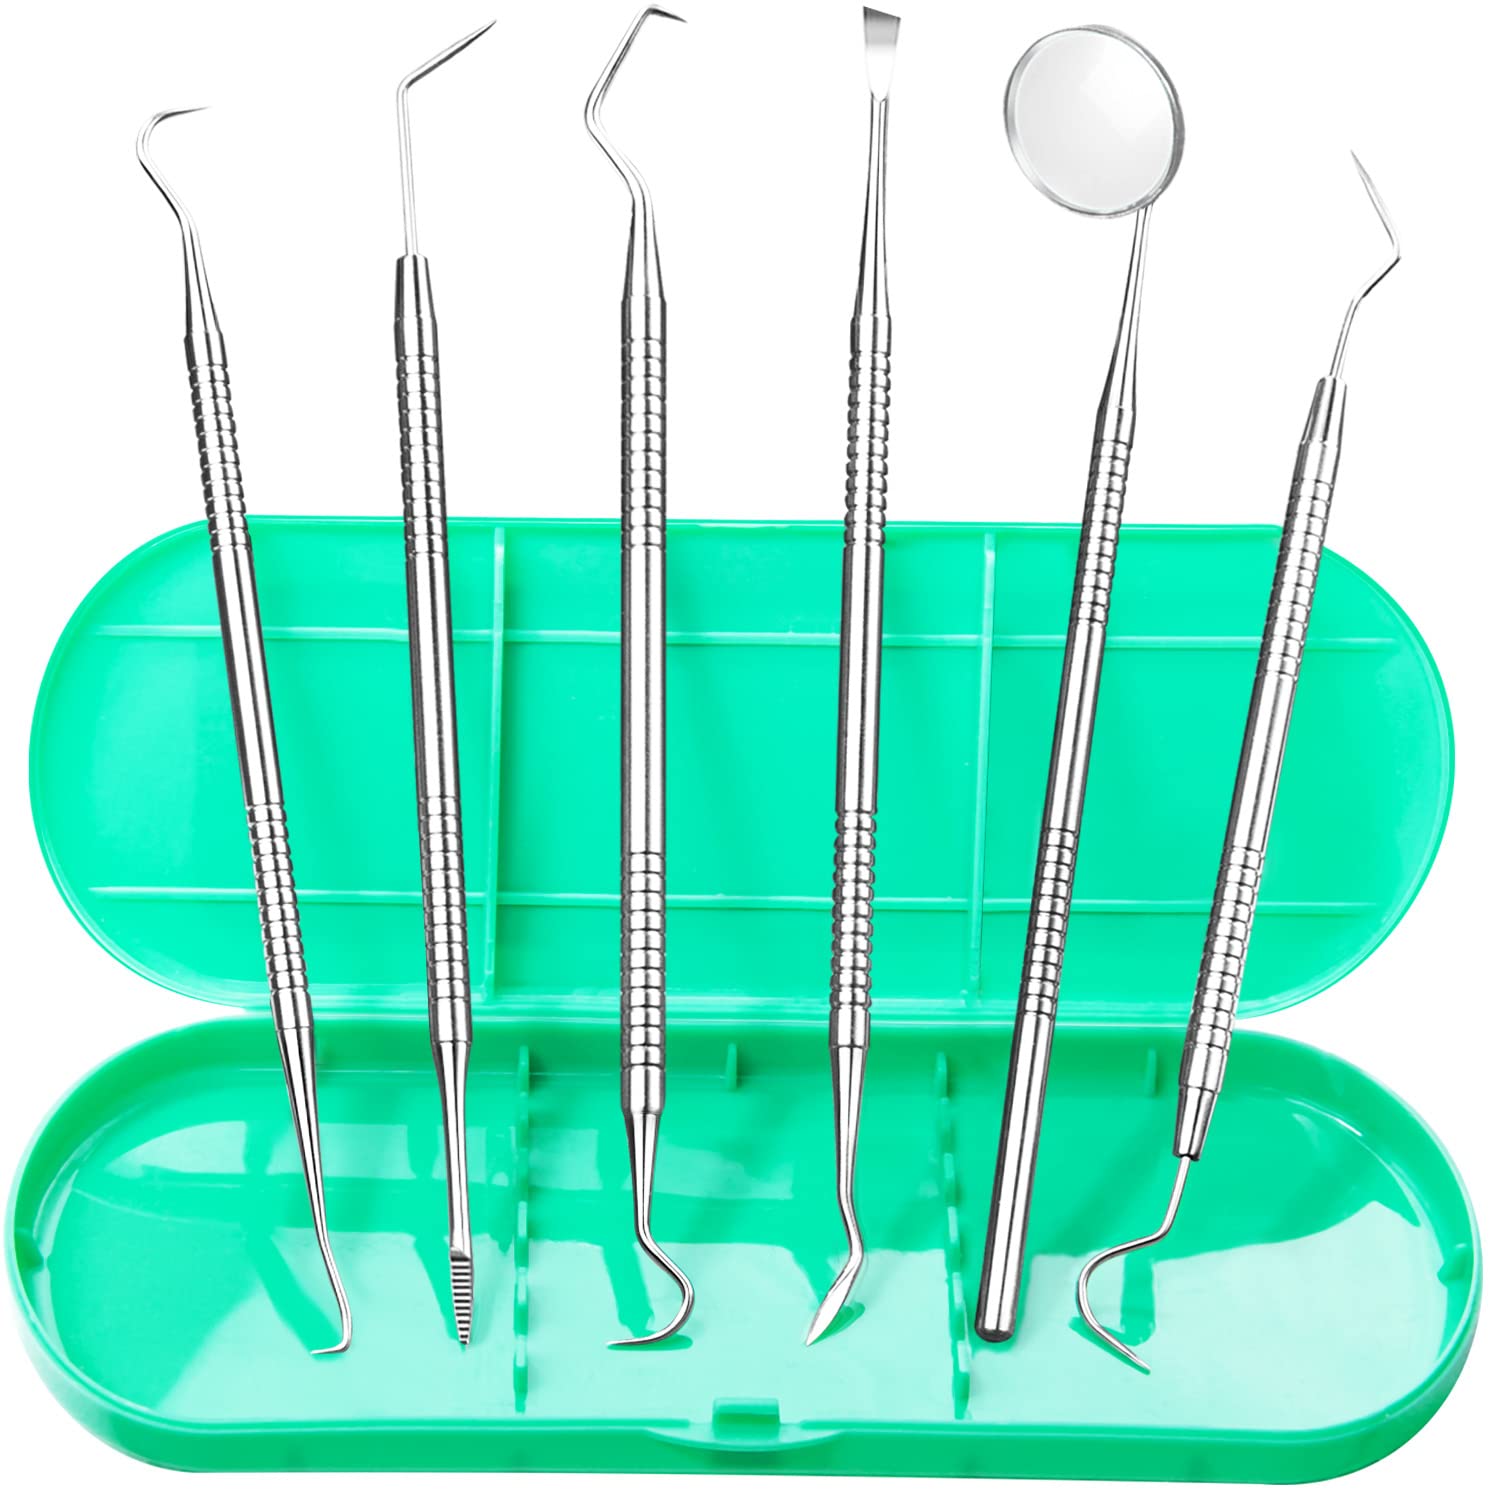 Dental Tools, Professional Plaque Remover for Teeth, Dental Hygiene Kit,  Stainless Steel Oral Care Cleaning Tools Set with Tooth Scraper Plaque  Tartar Remover, Metal Dental Pick Scaler - with Case Dental Tools